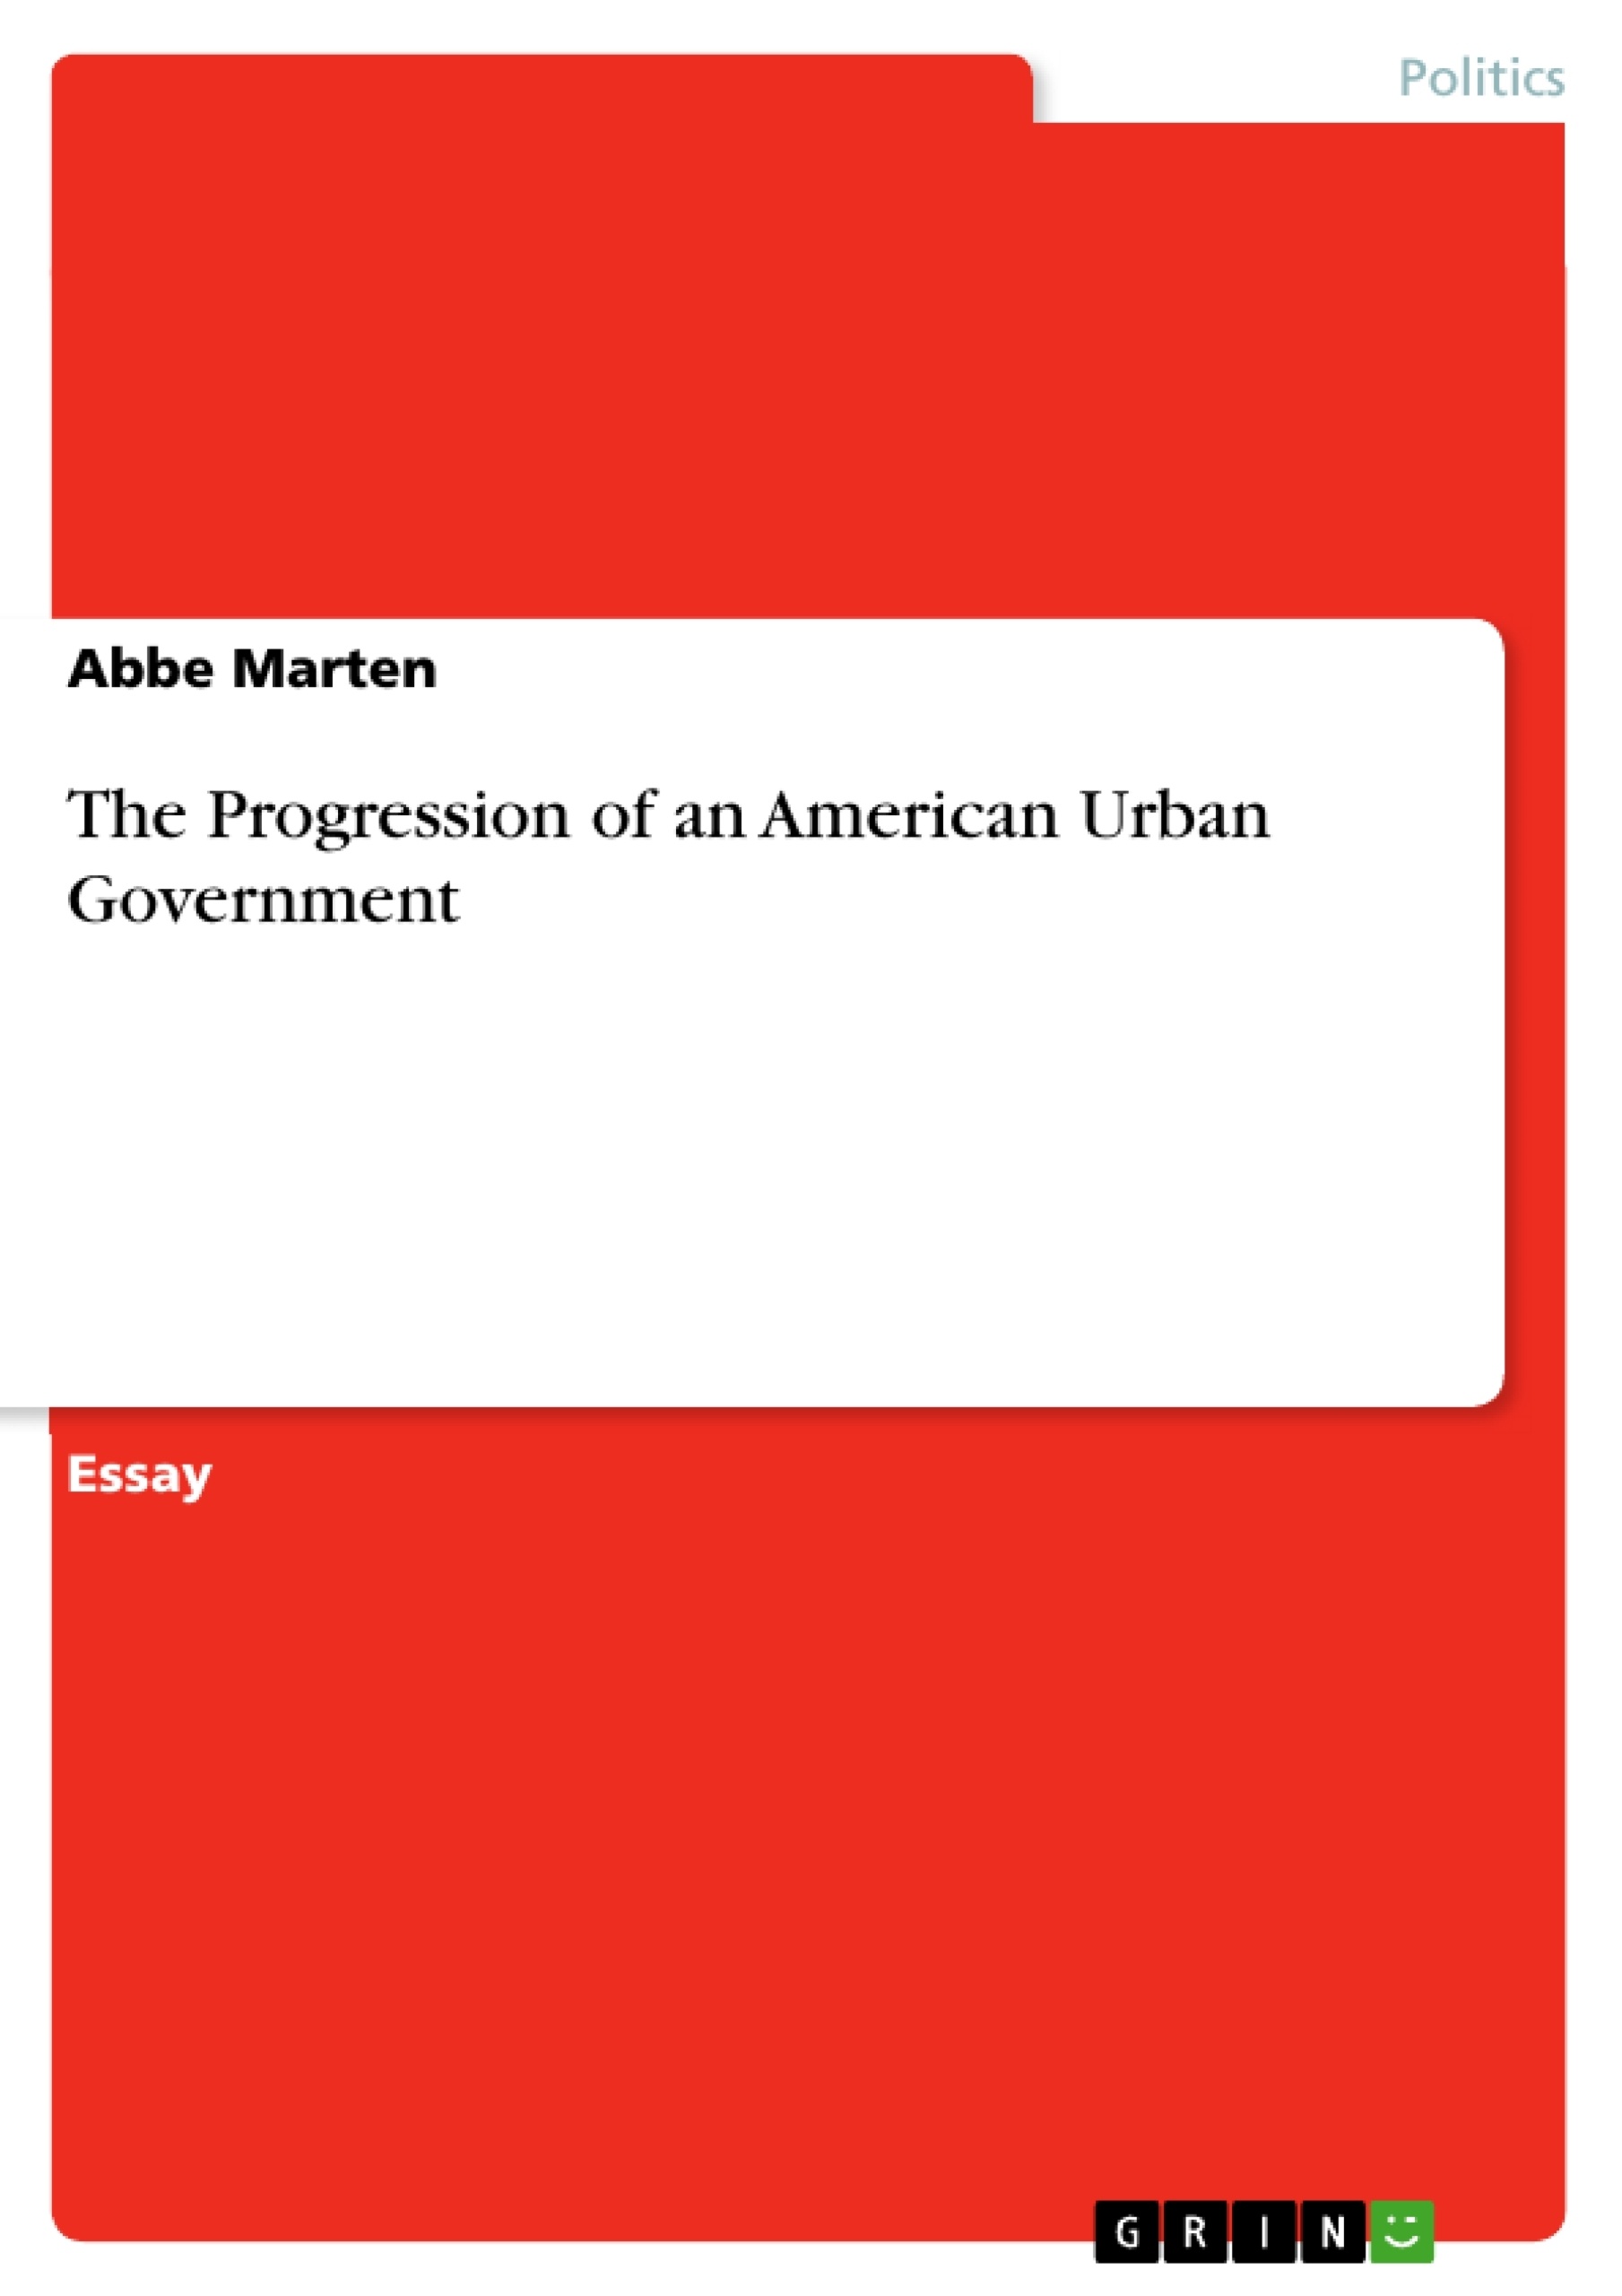 Título: The Progression of an American Urban Government